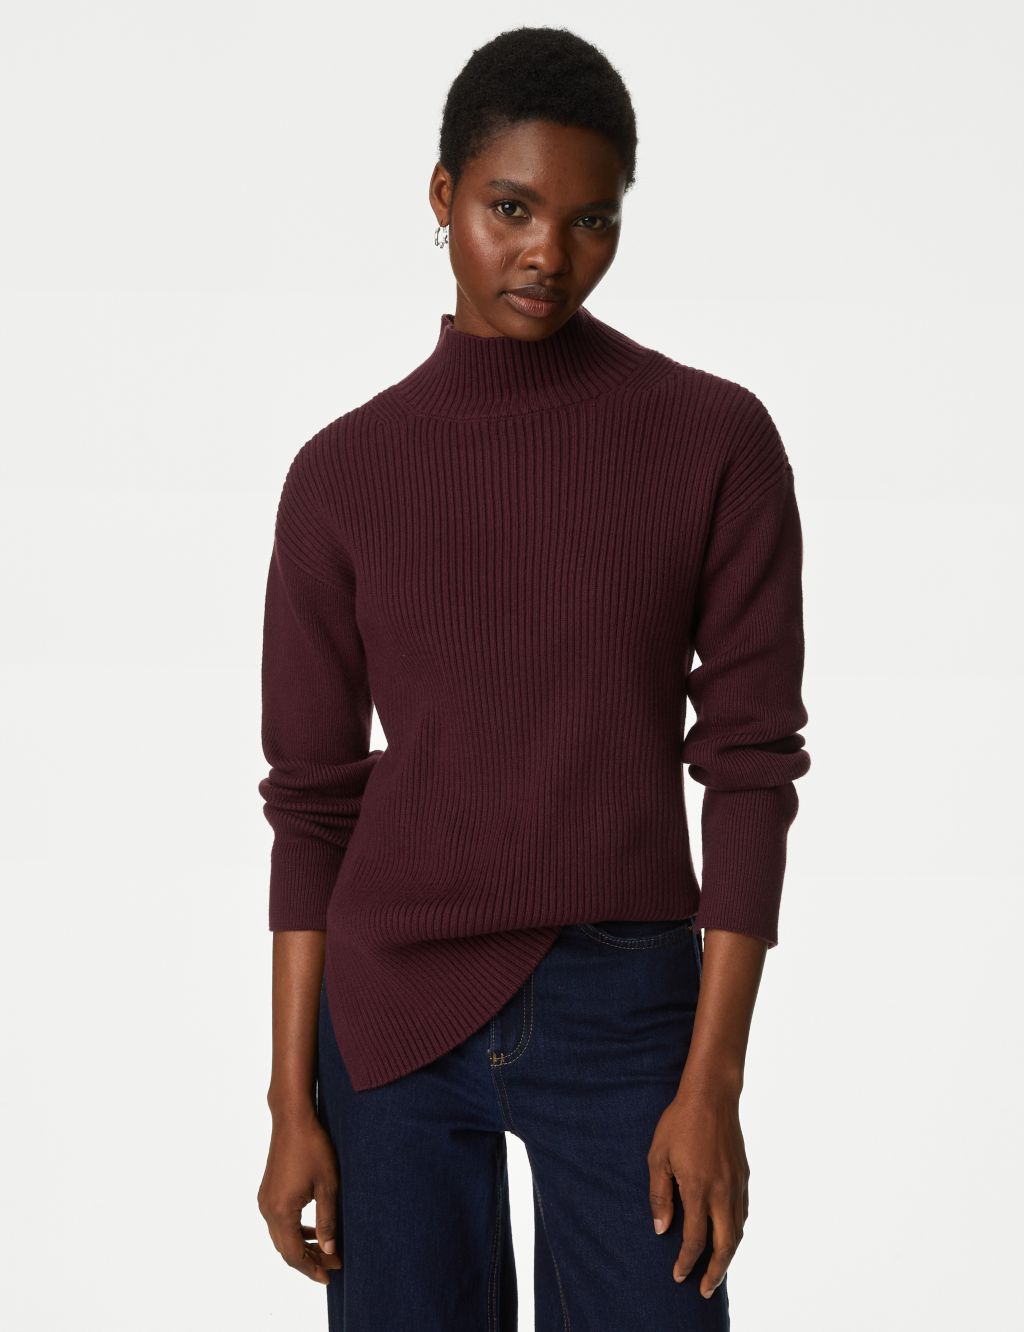 Cotton Rich Ribbed Jumper with Merino Wool image 3